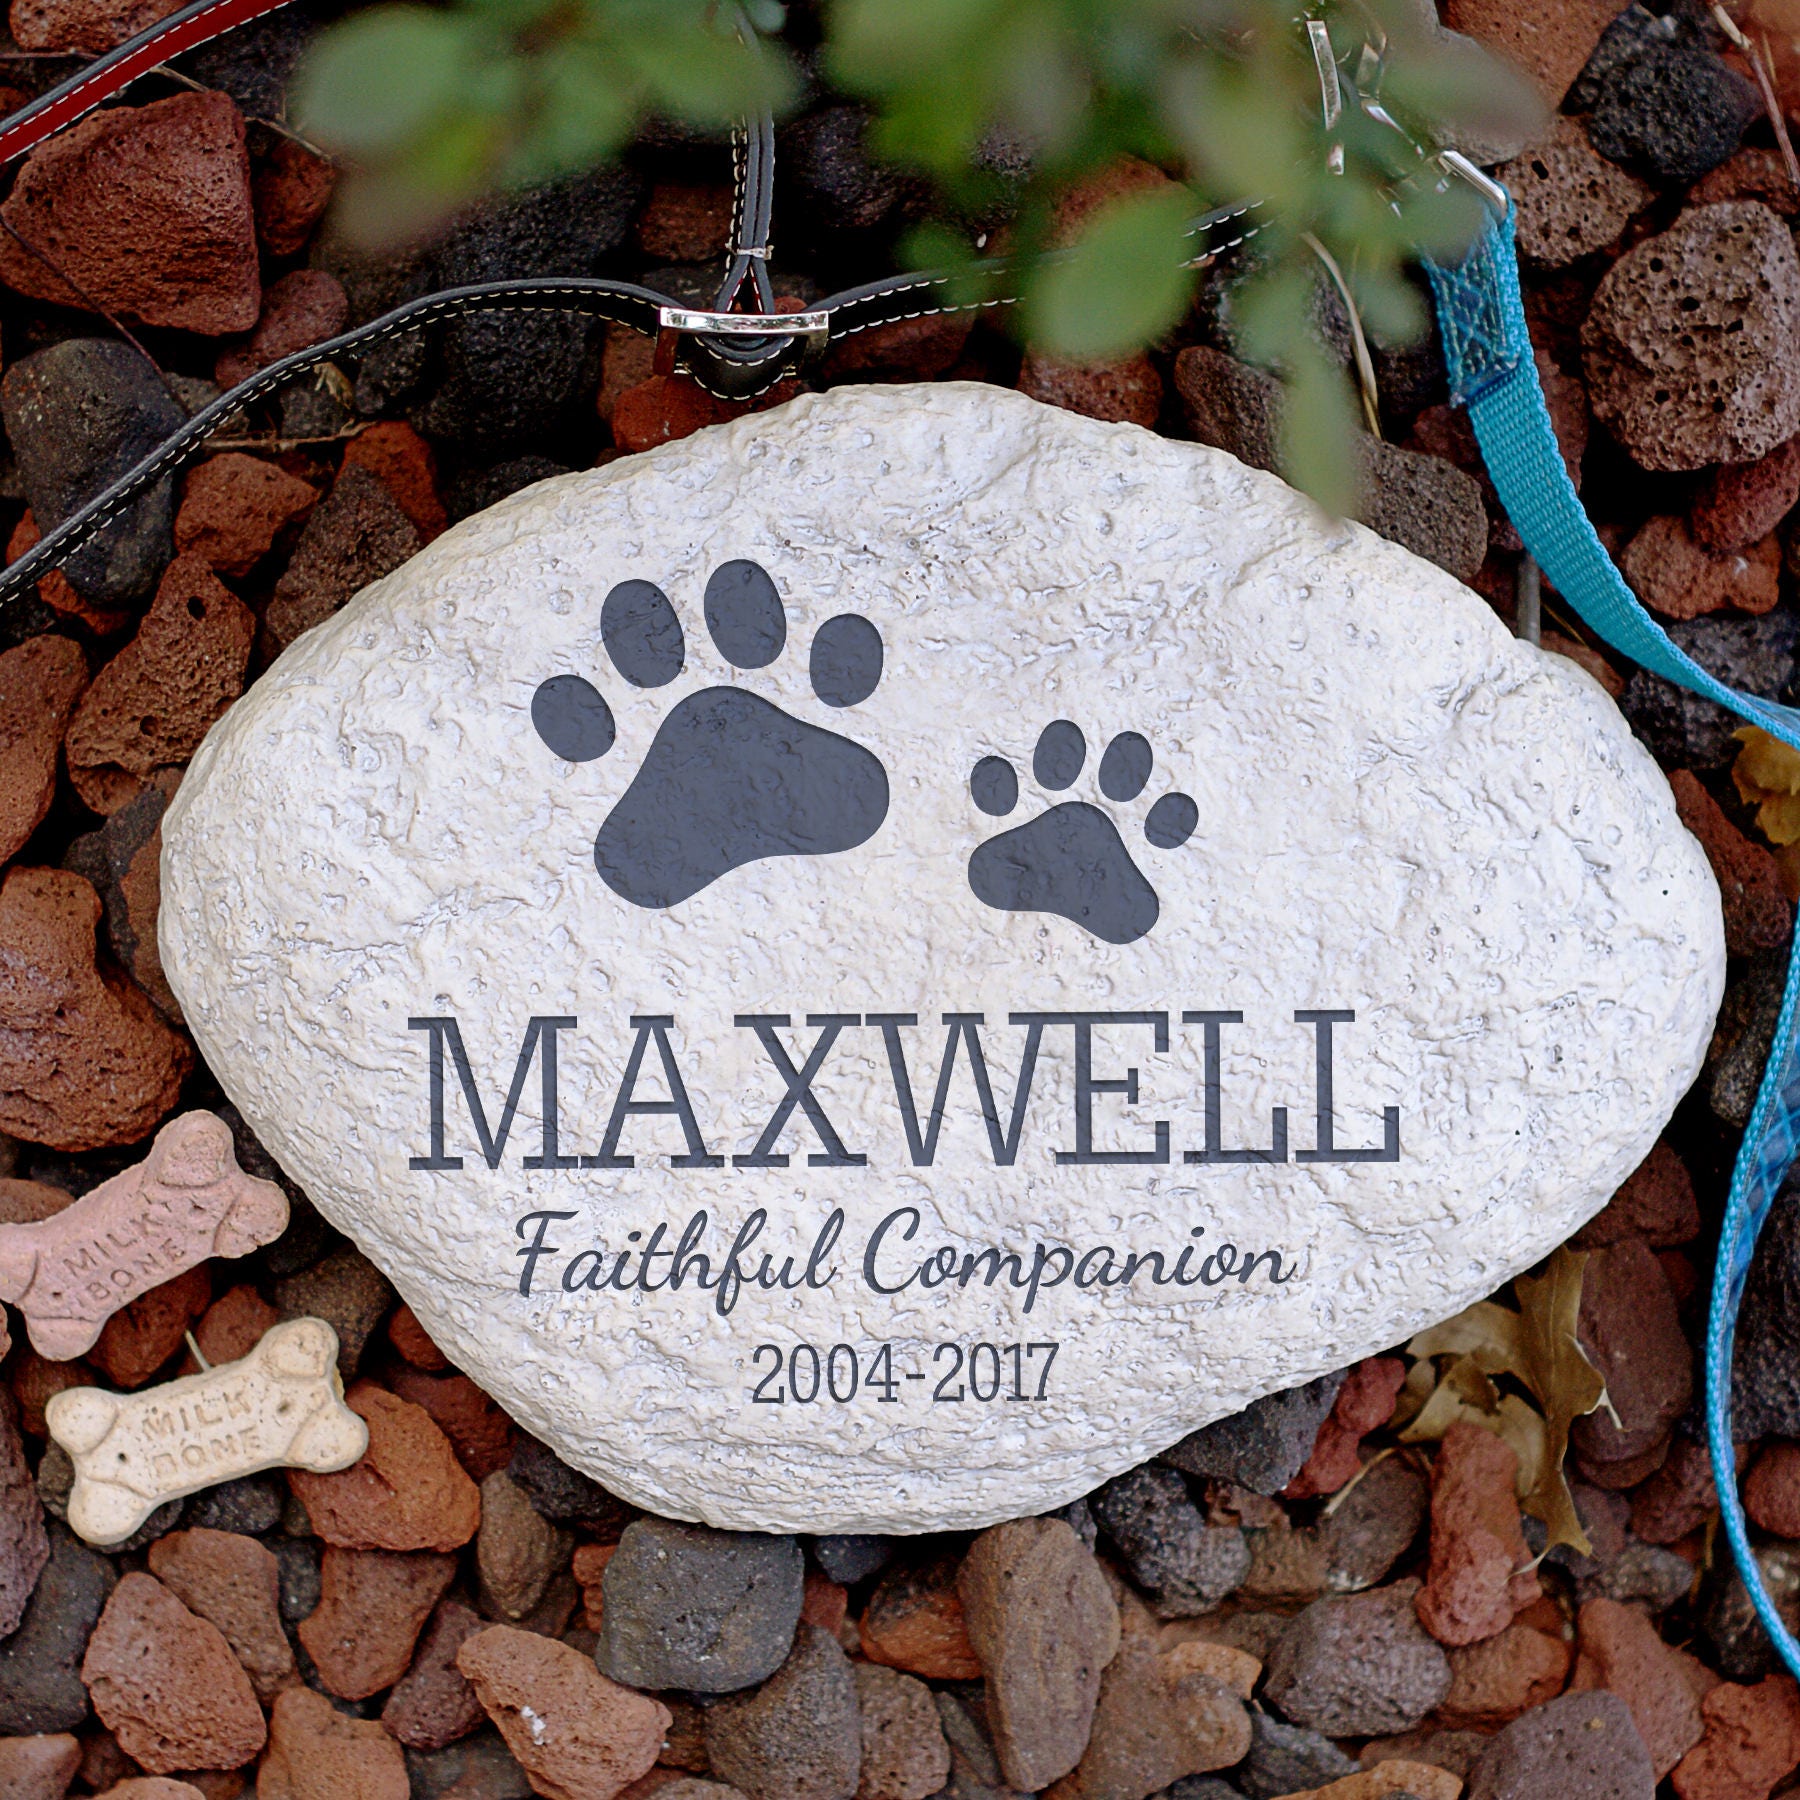 58 HQ Images Pet Grave Markers Stone : Pet Grave Markers - Cat and Dog Lovers